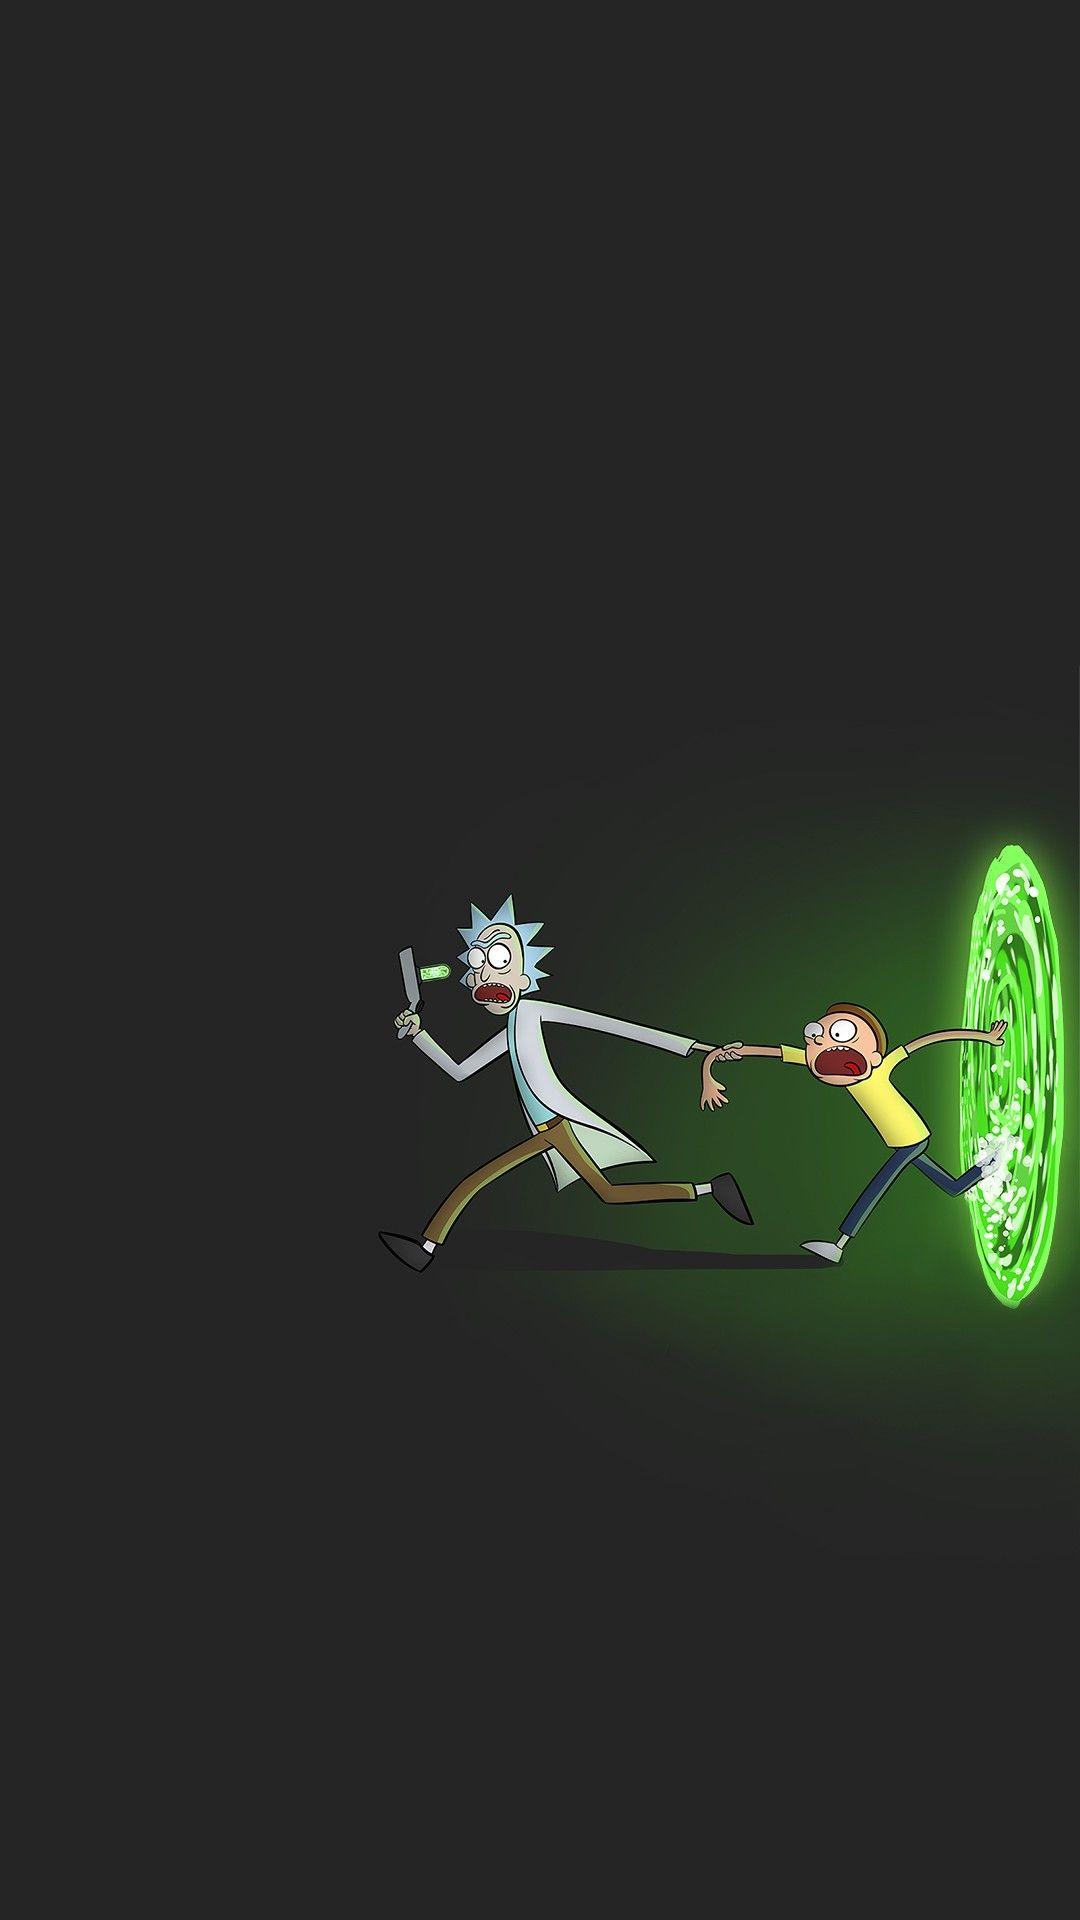 Rick and Morty iPhone 7 Plus Wallpaper. Best HD Wallpaper